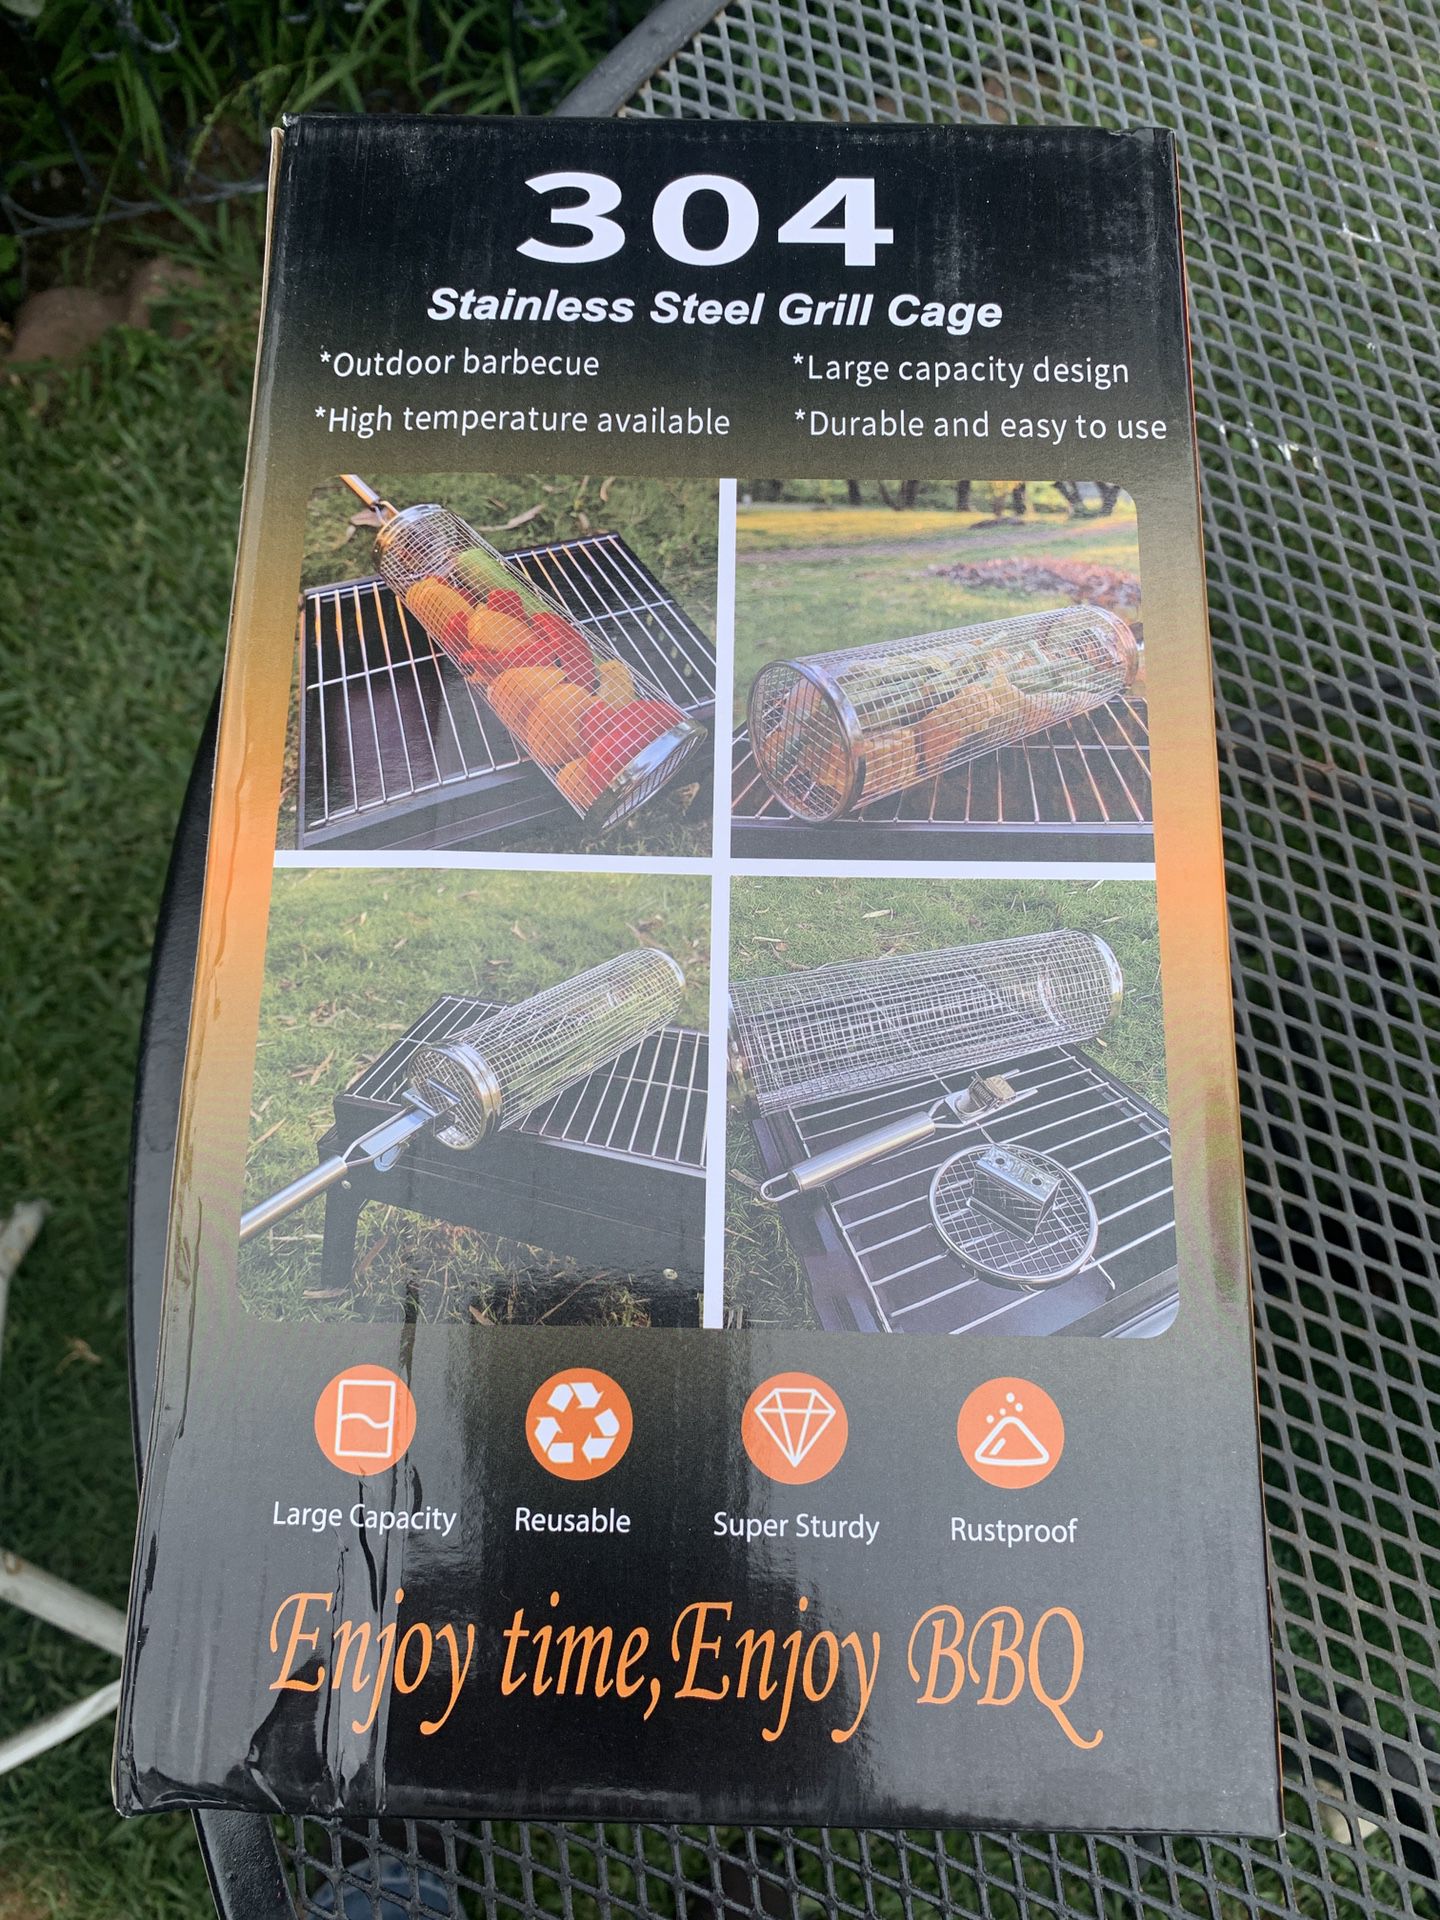 Stainless Steel Grill Cage 